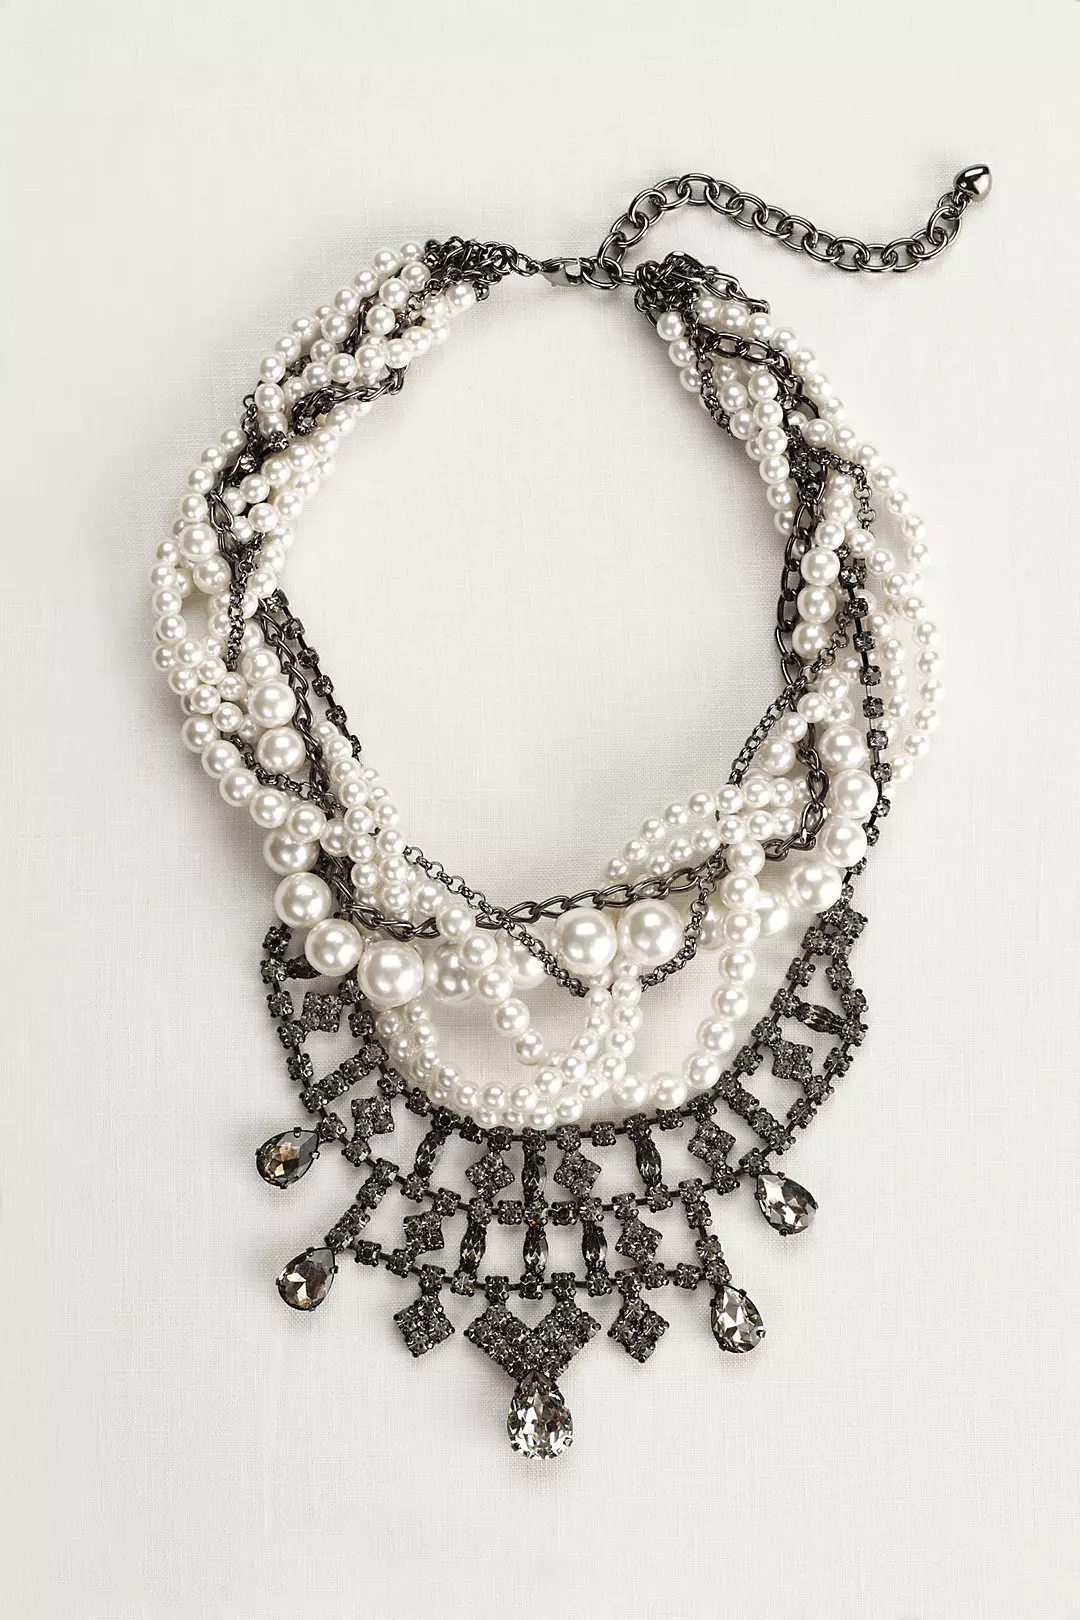 Multi Row Pearl and Crystal Woven Necklace Image